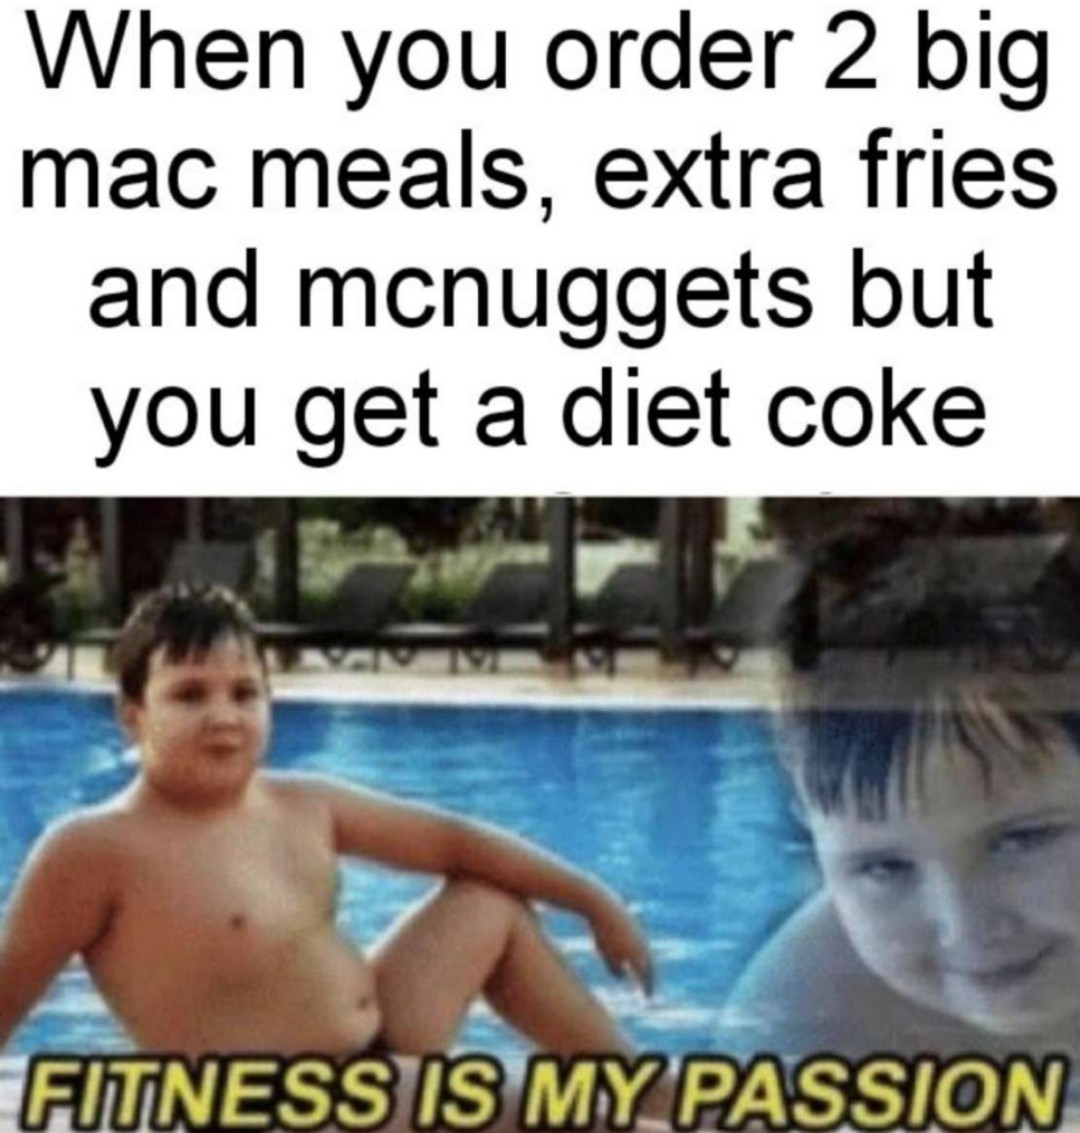 Fitness is my Passion - meme